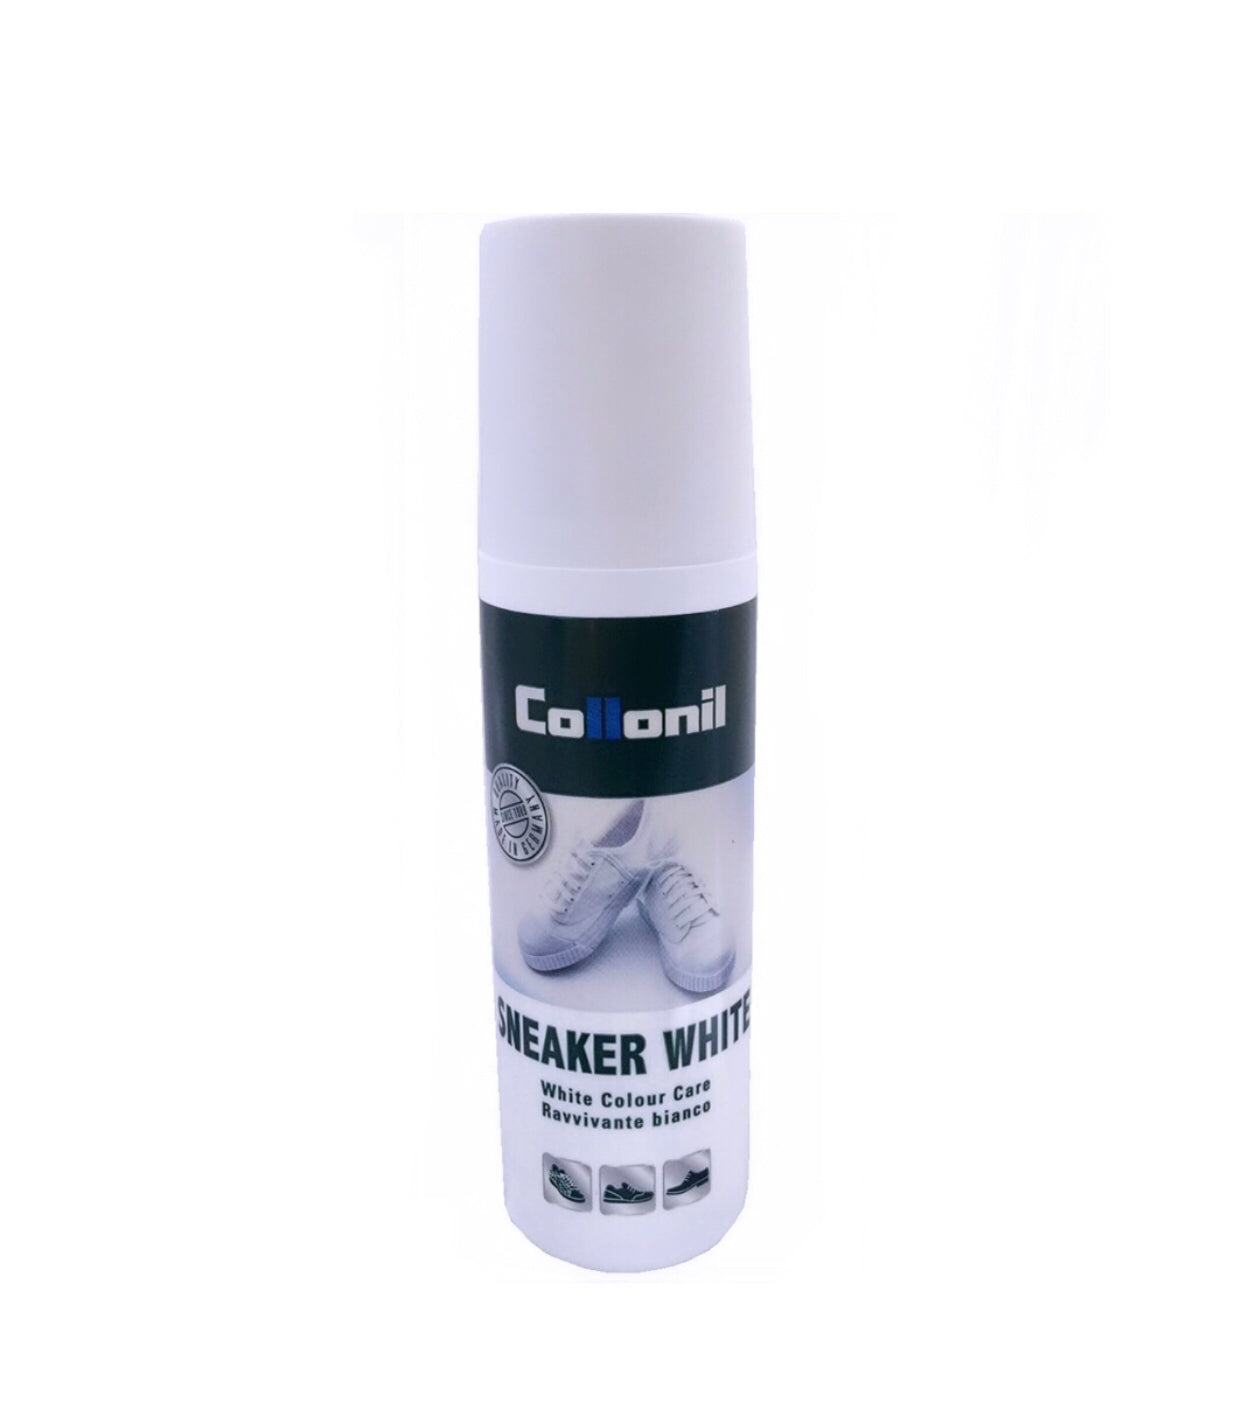 Collonil Sneaker White Liquid Leather Polish 100ml Made In Germany